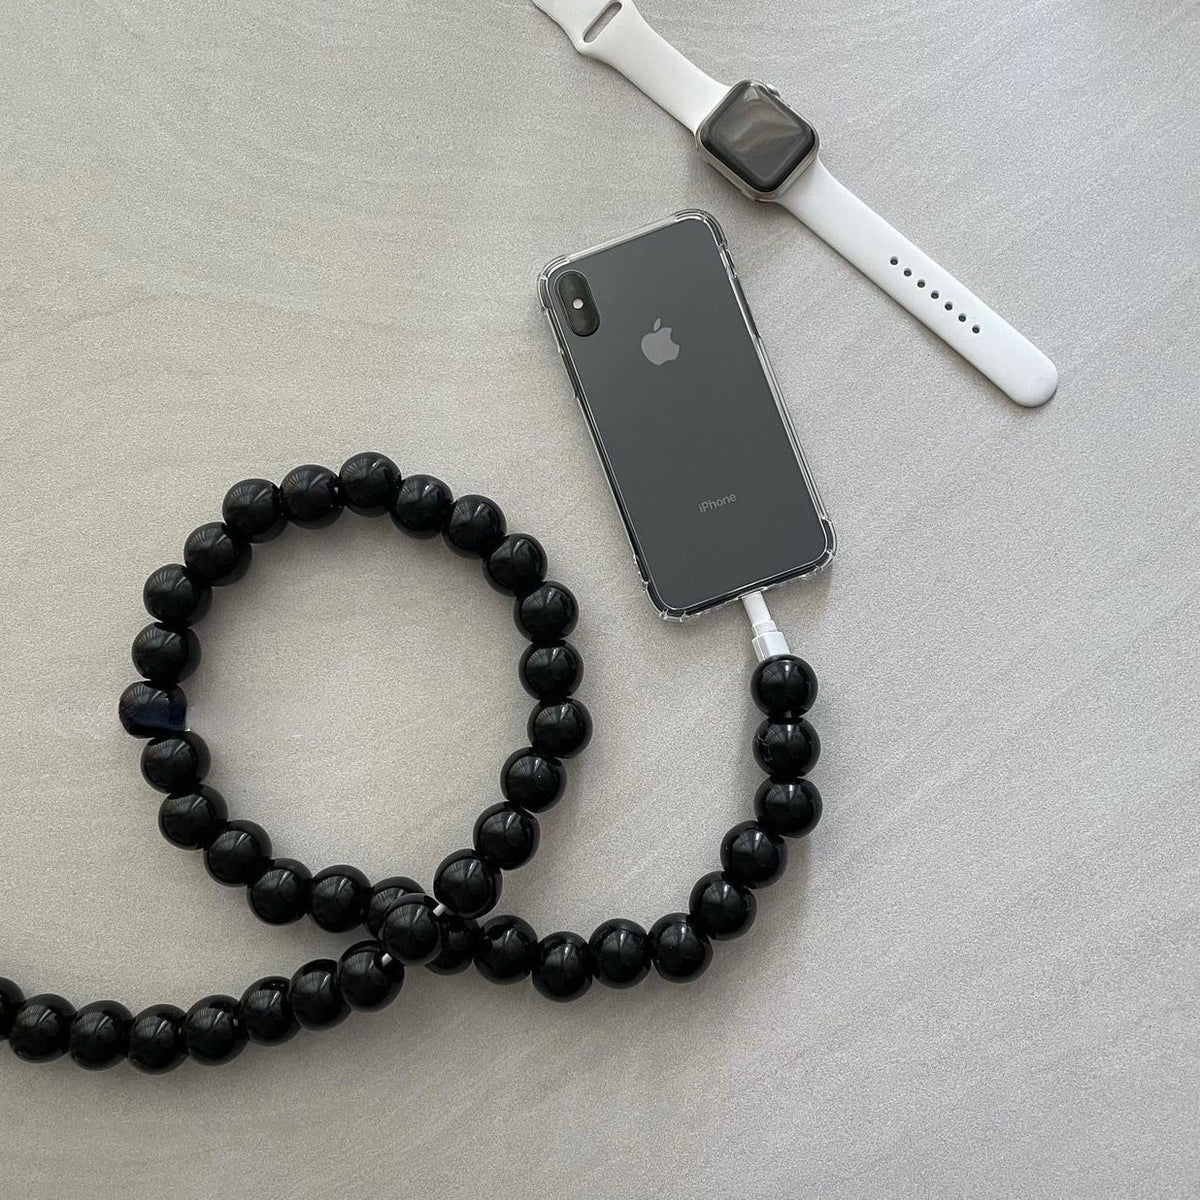 Black Beaded iPhone Charger Cable - 1M